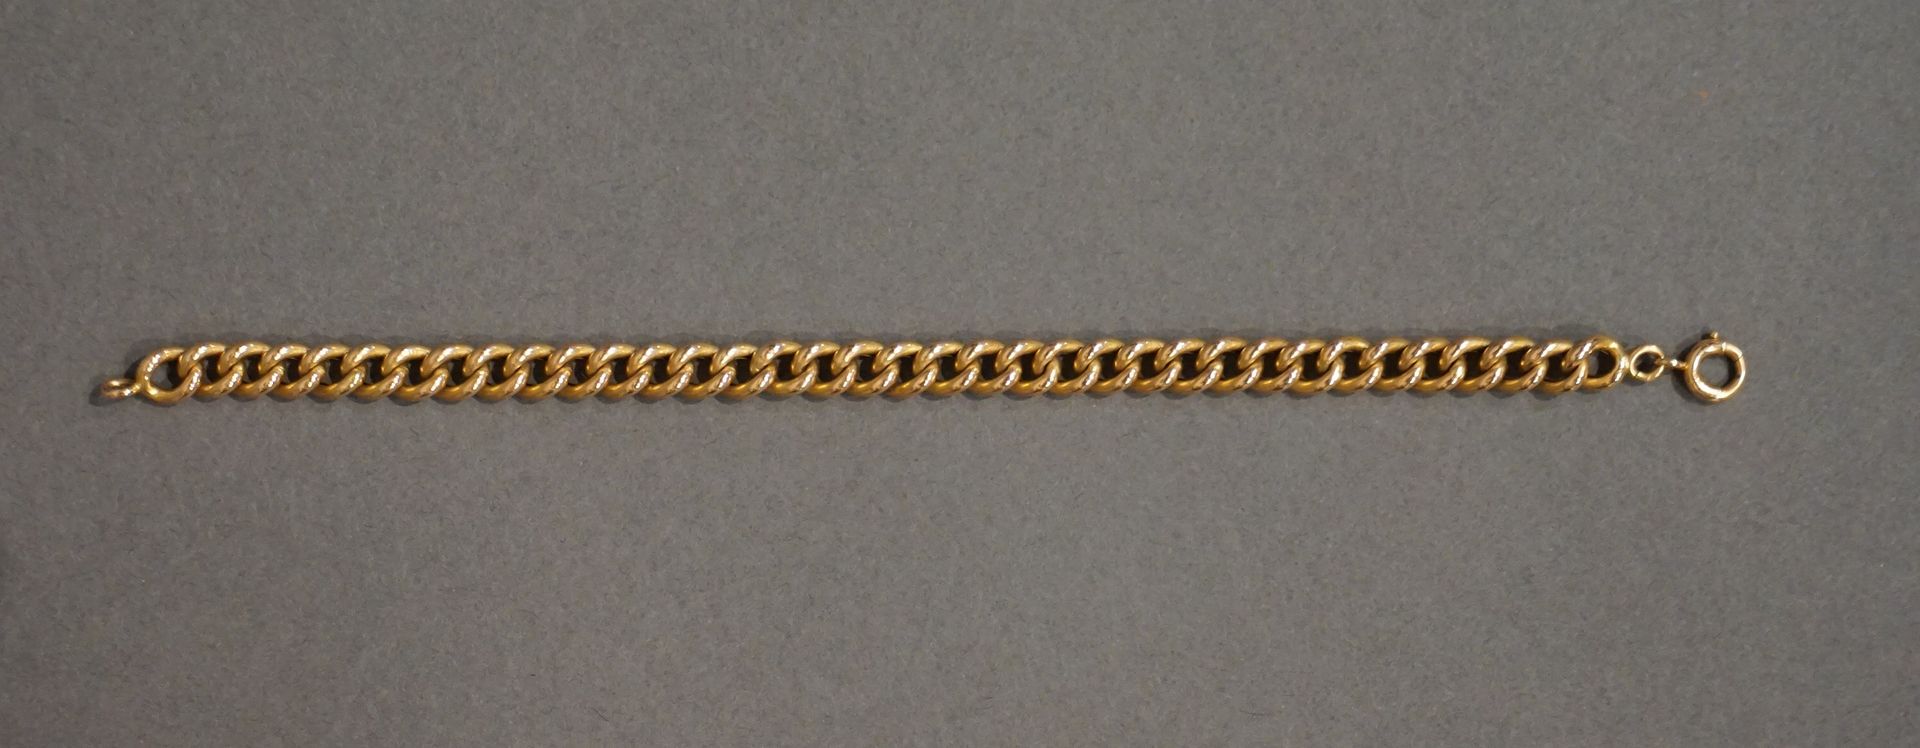 Bracelet Bracelet - chain with large links in gold (9.4grs)